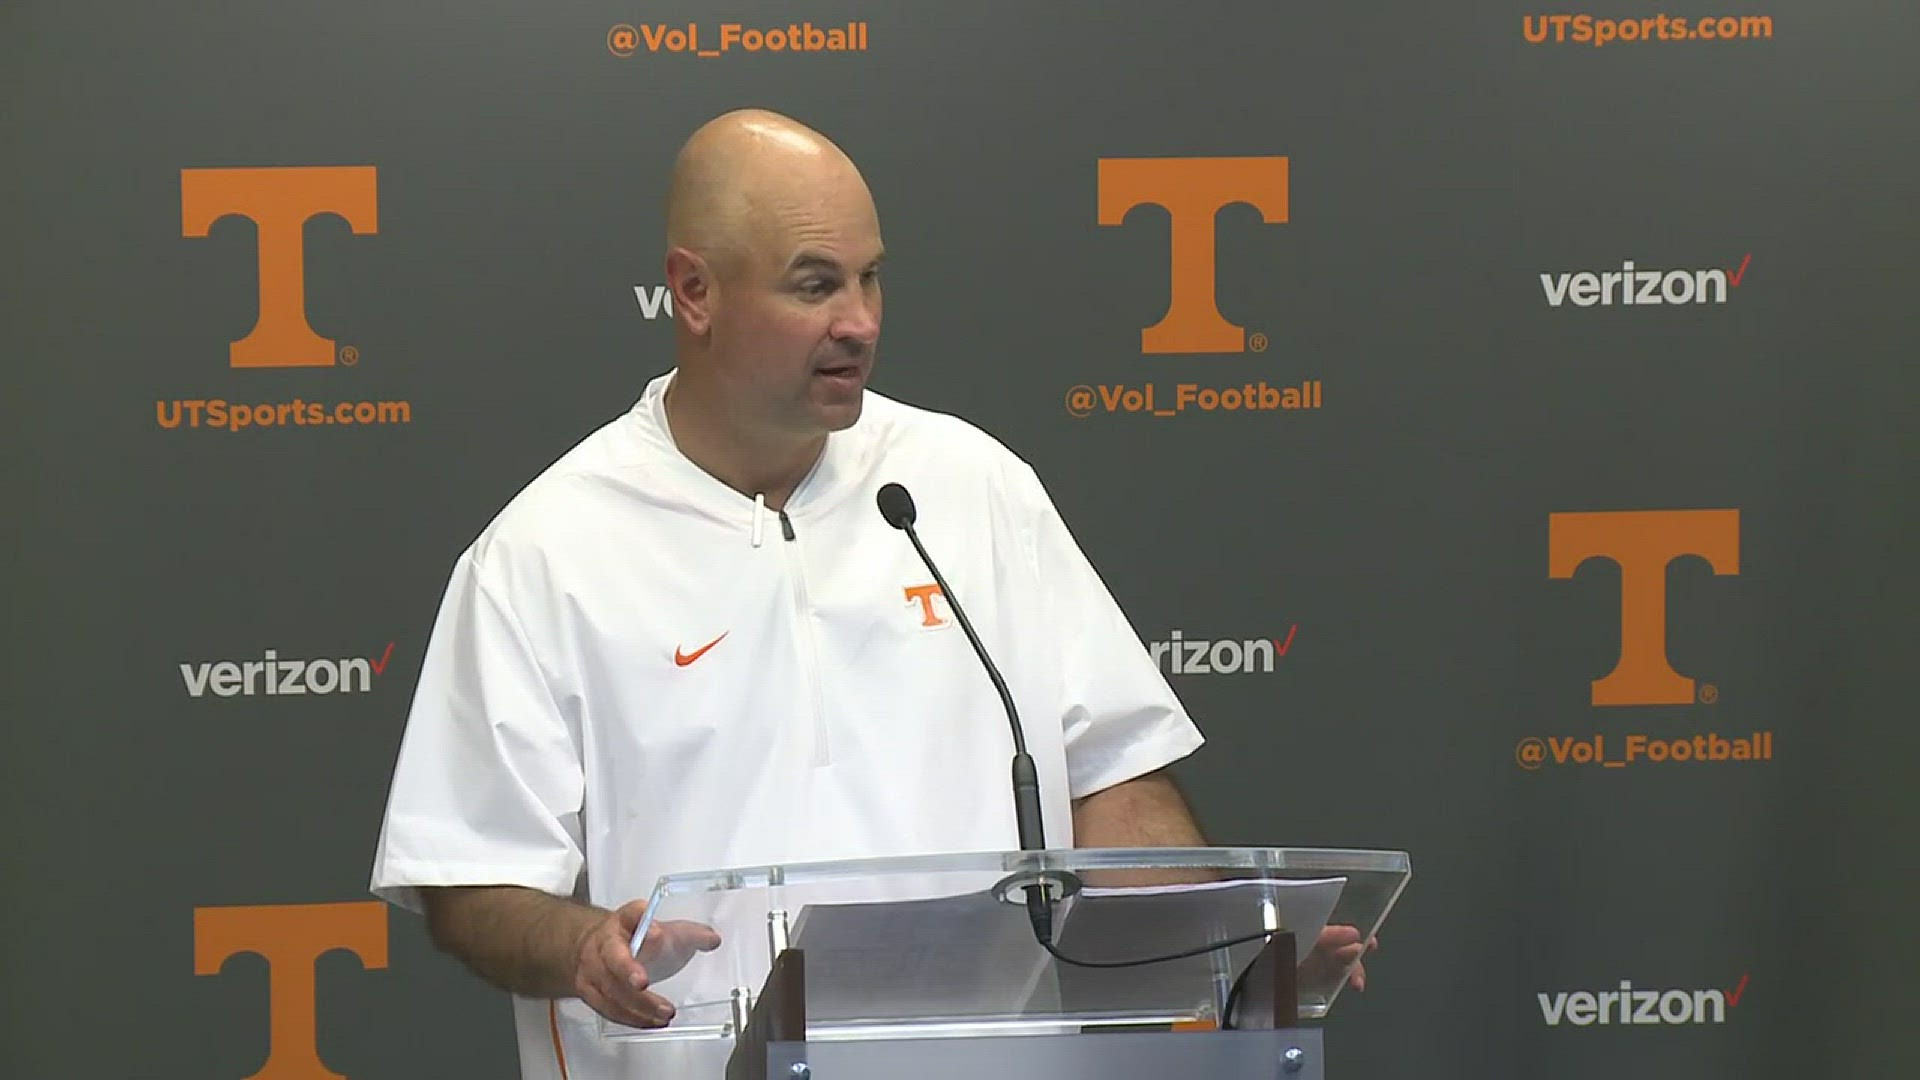 When asked about the performance of his running back, head coach Jeremy Pruitt emphasized how the unit needs to work on taking better care of the football.